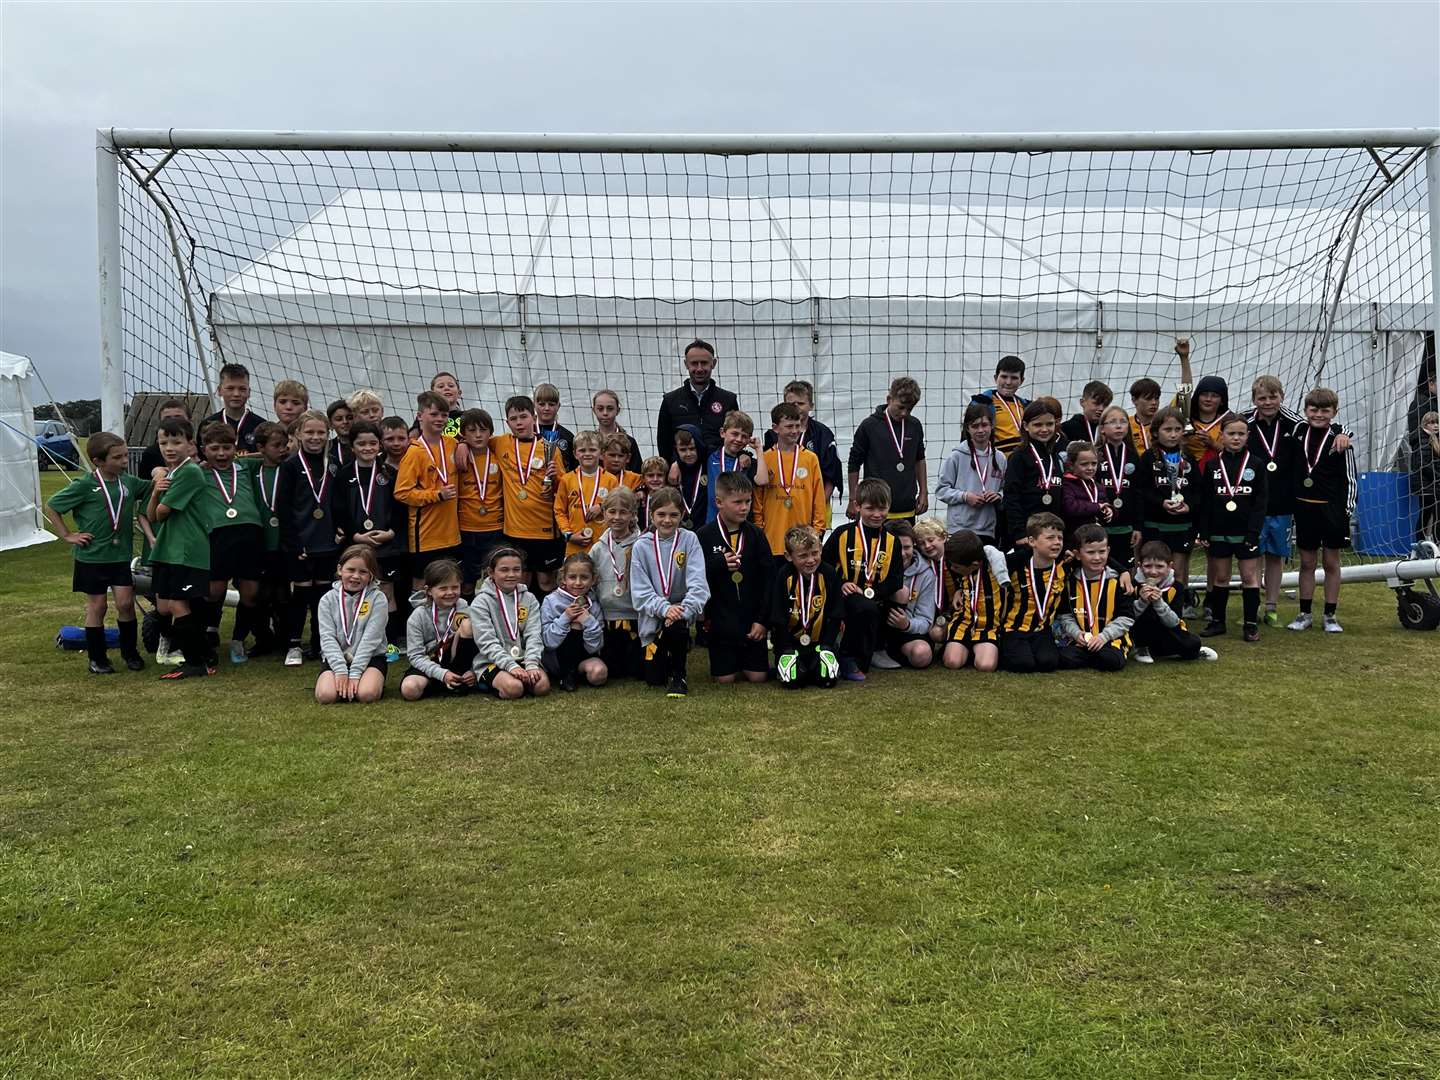 Brora Rangers Football Club sponsored a county football competition.